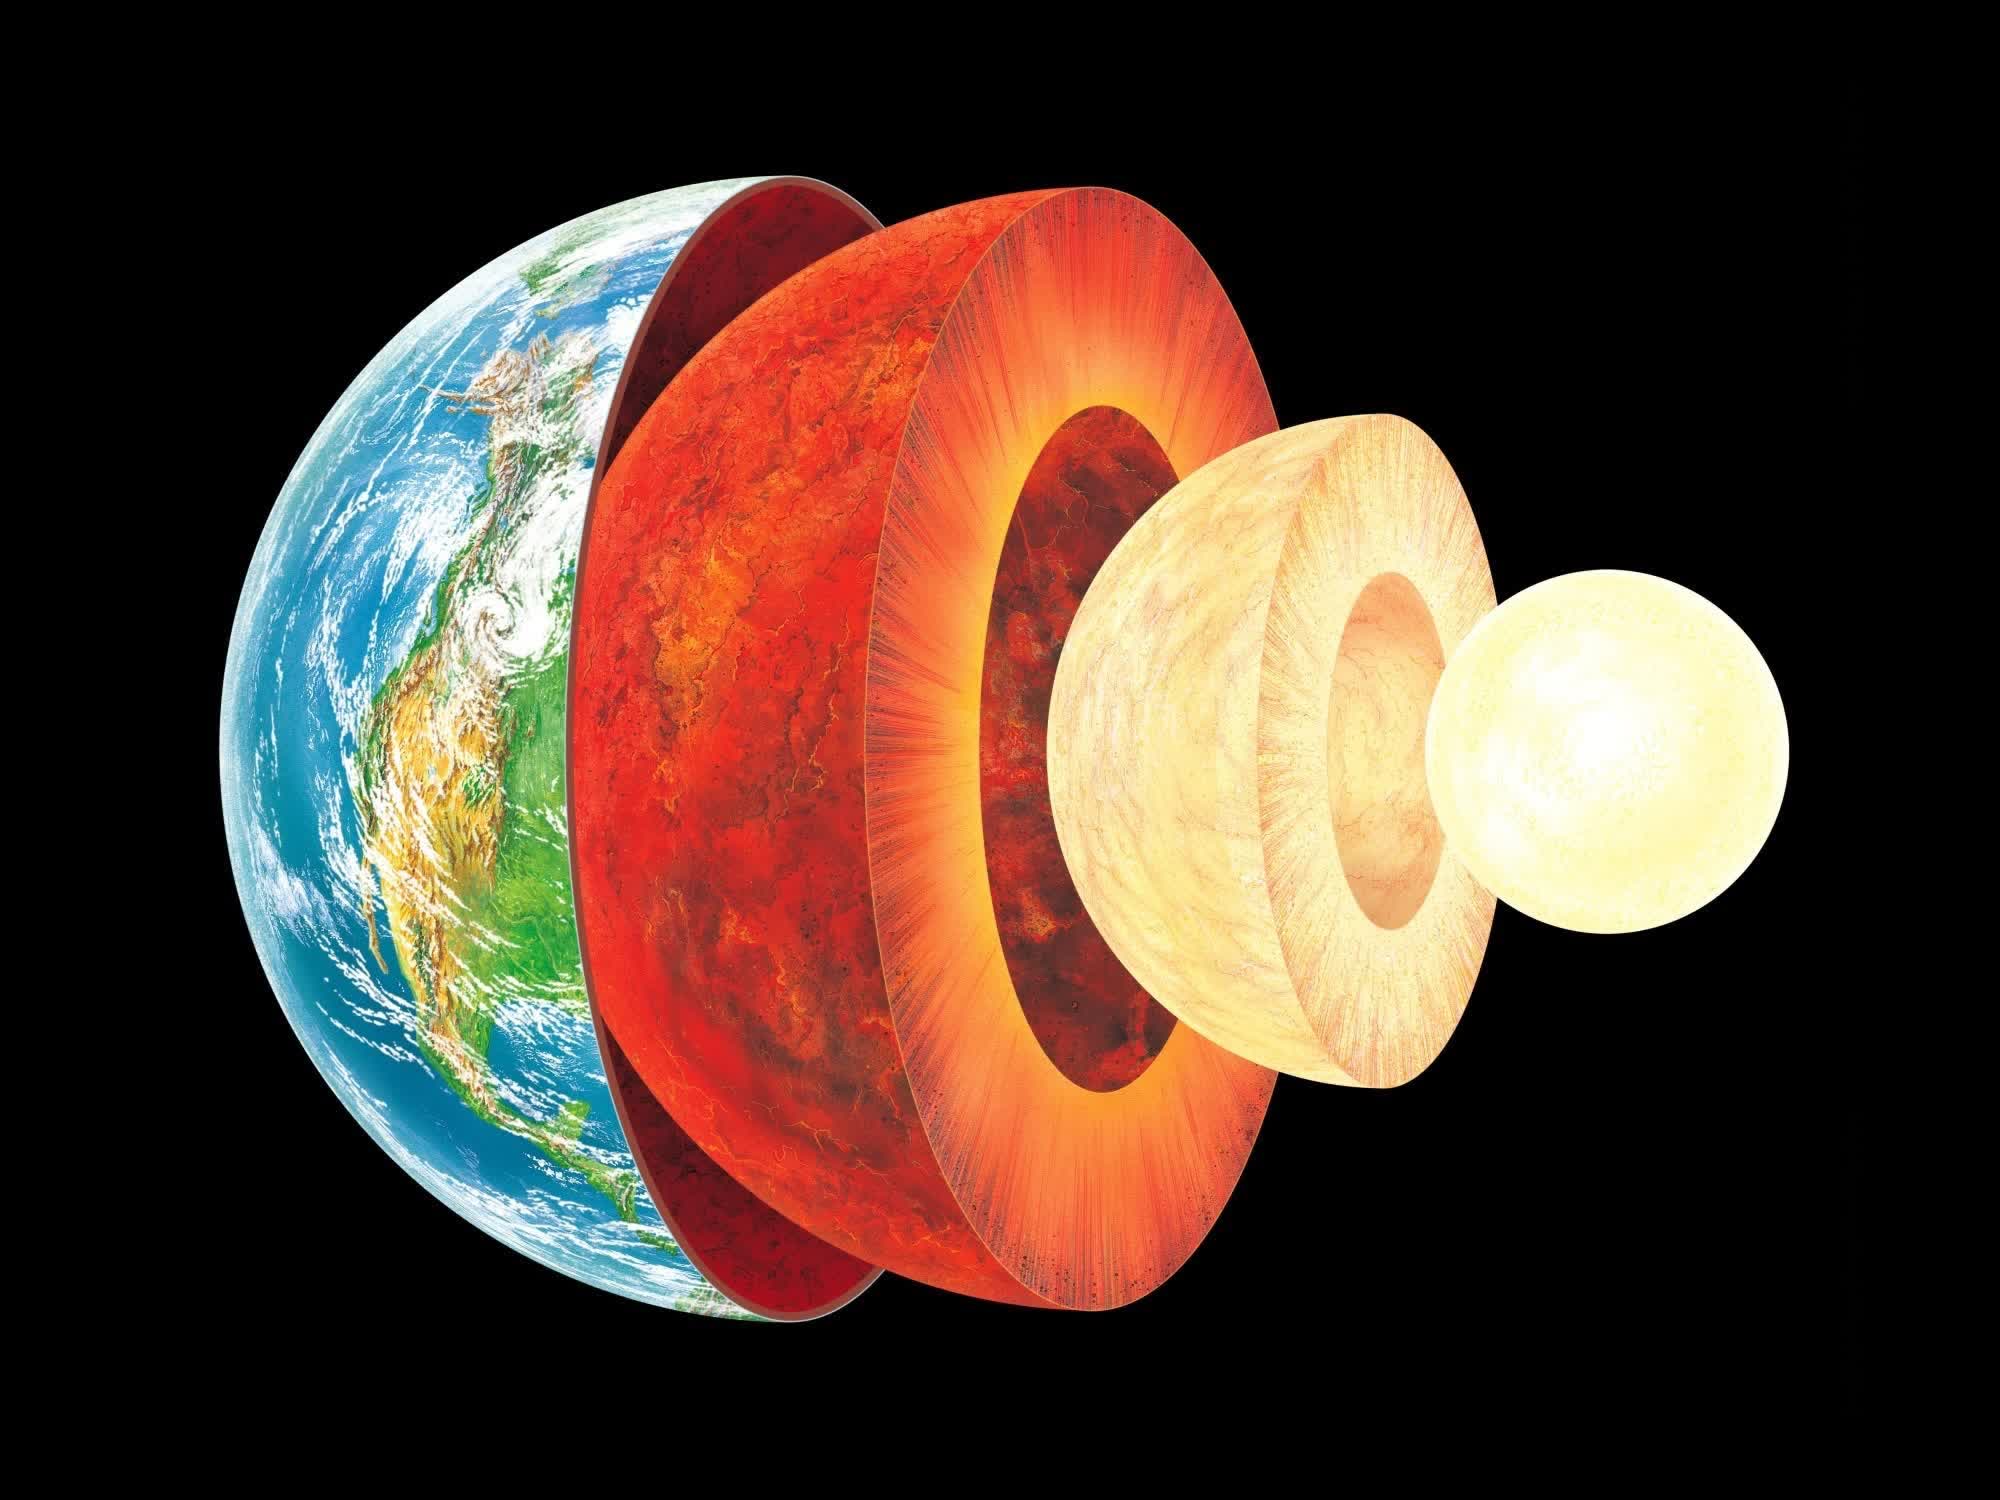 Earth's inner core might be reversing its spin